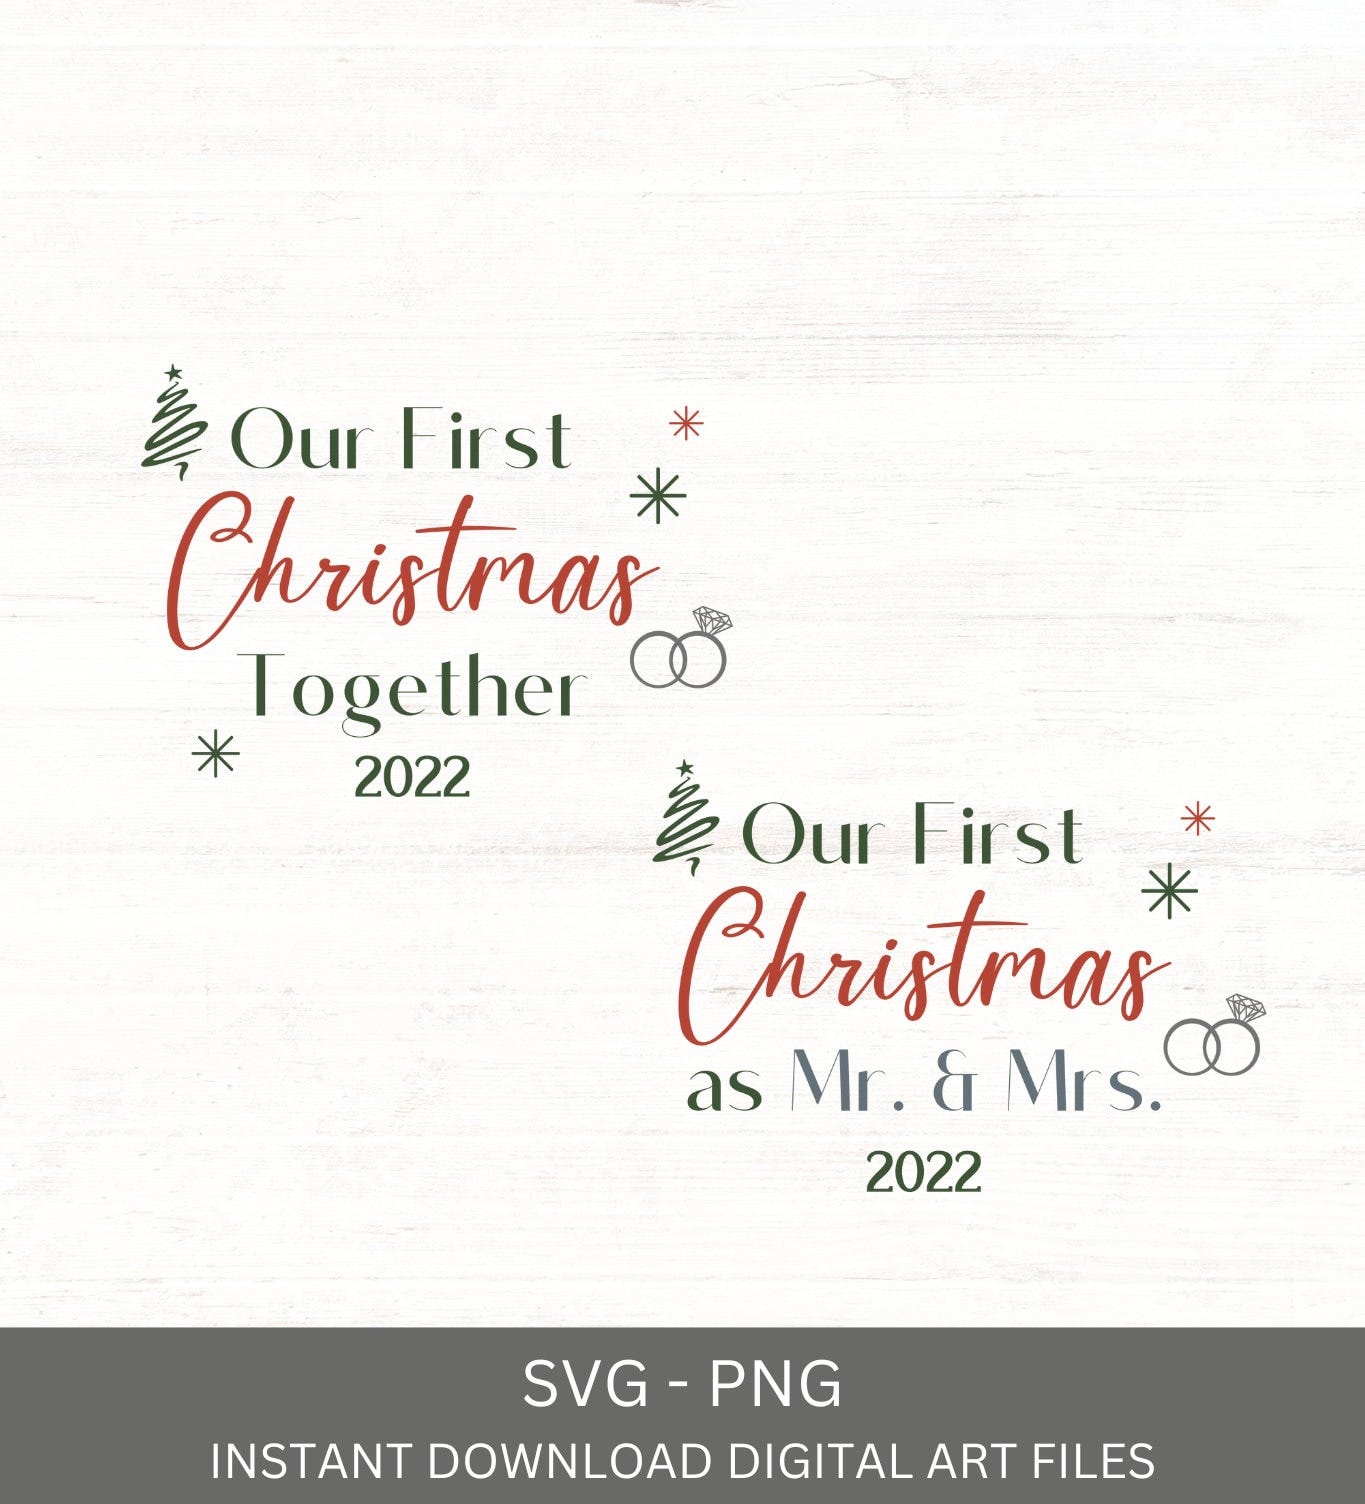 Our First Christmas Together as Mr. and Mrs. 2022, Svg, Png, Holiday Digital Design Download